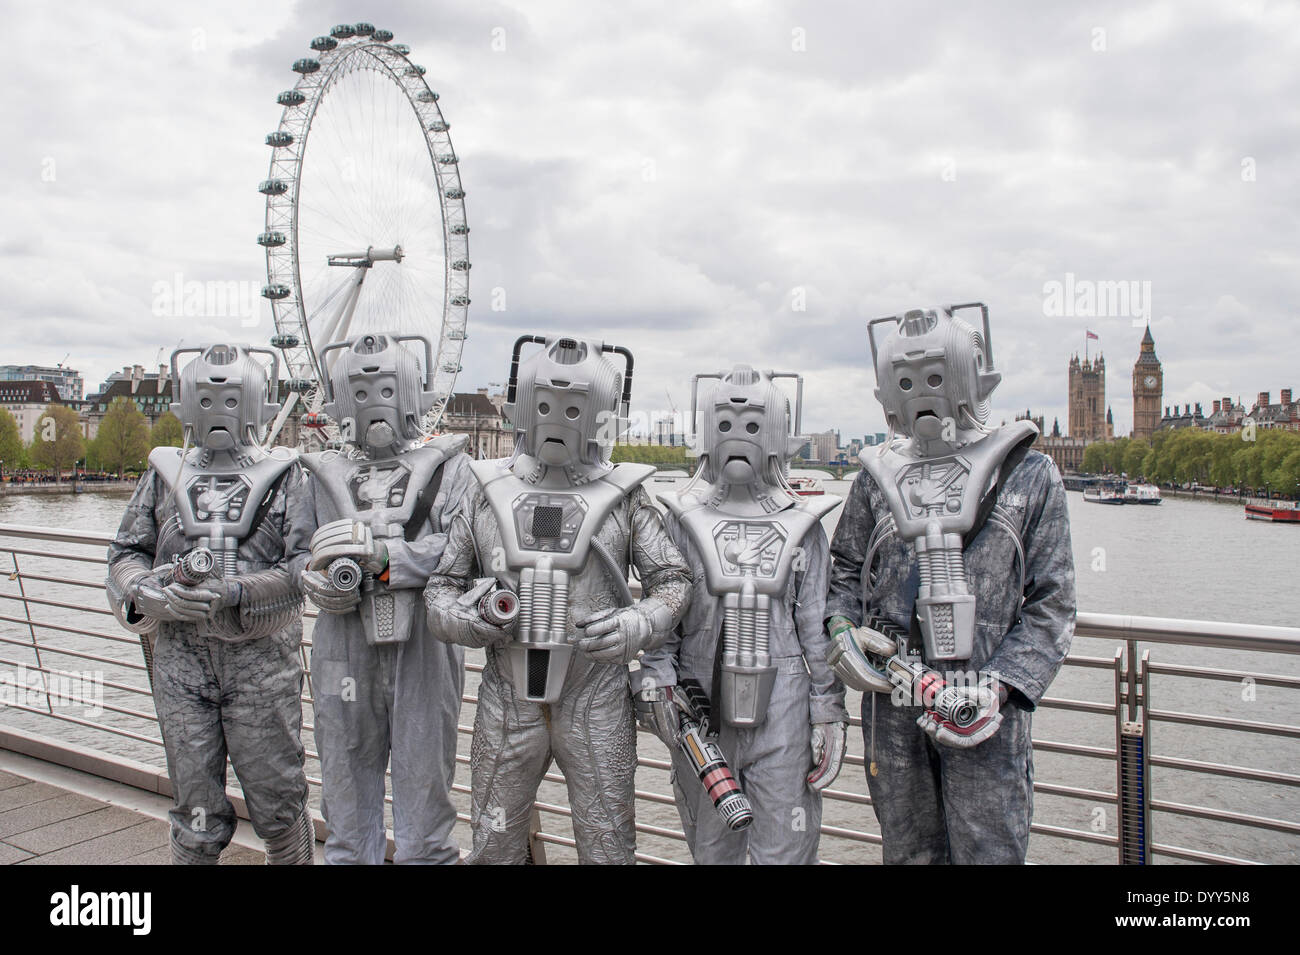 London, 27 April 2014 - people dressed as their favourite sci-fi characters take part in the Sci-Fi London 2014 costume parade starting at Somerset House and finishing at the BFI on the South Bank.  Cybermen on Hungerford Bridge, with the London Eye and Houses of Parliament in the distance.    Credit:  Stephen Chung/Alamy Live News Stock Photo